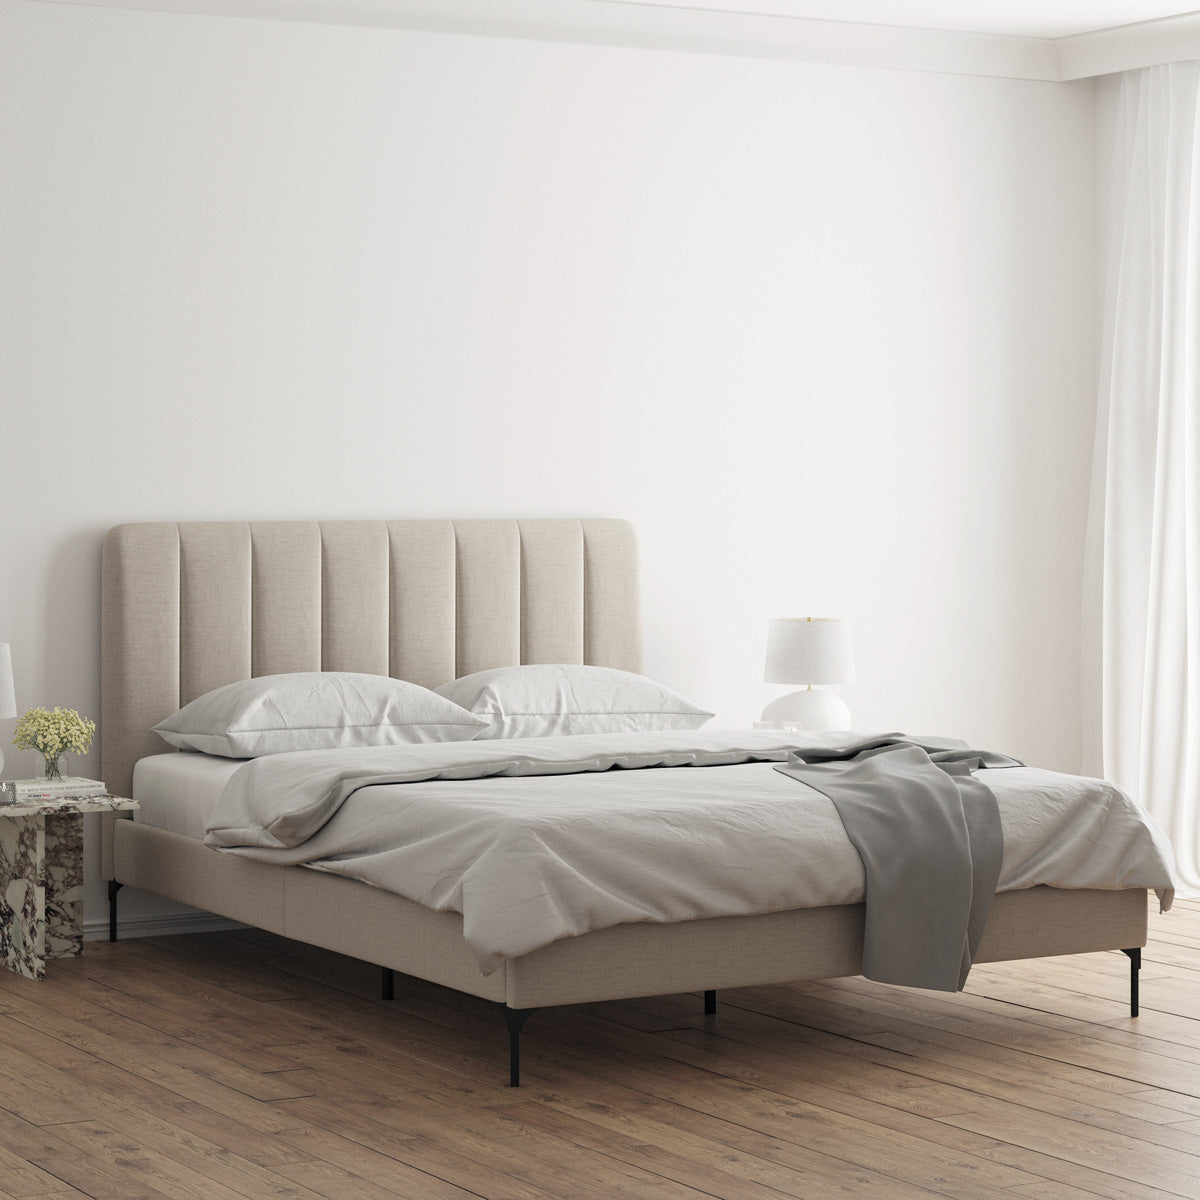 Souffle Upholstered Bed Frame (Natural Beige Fabric)